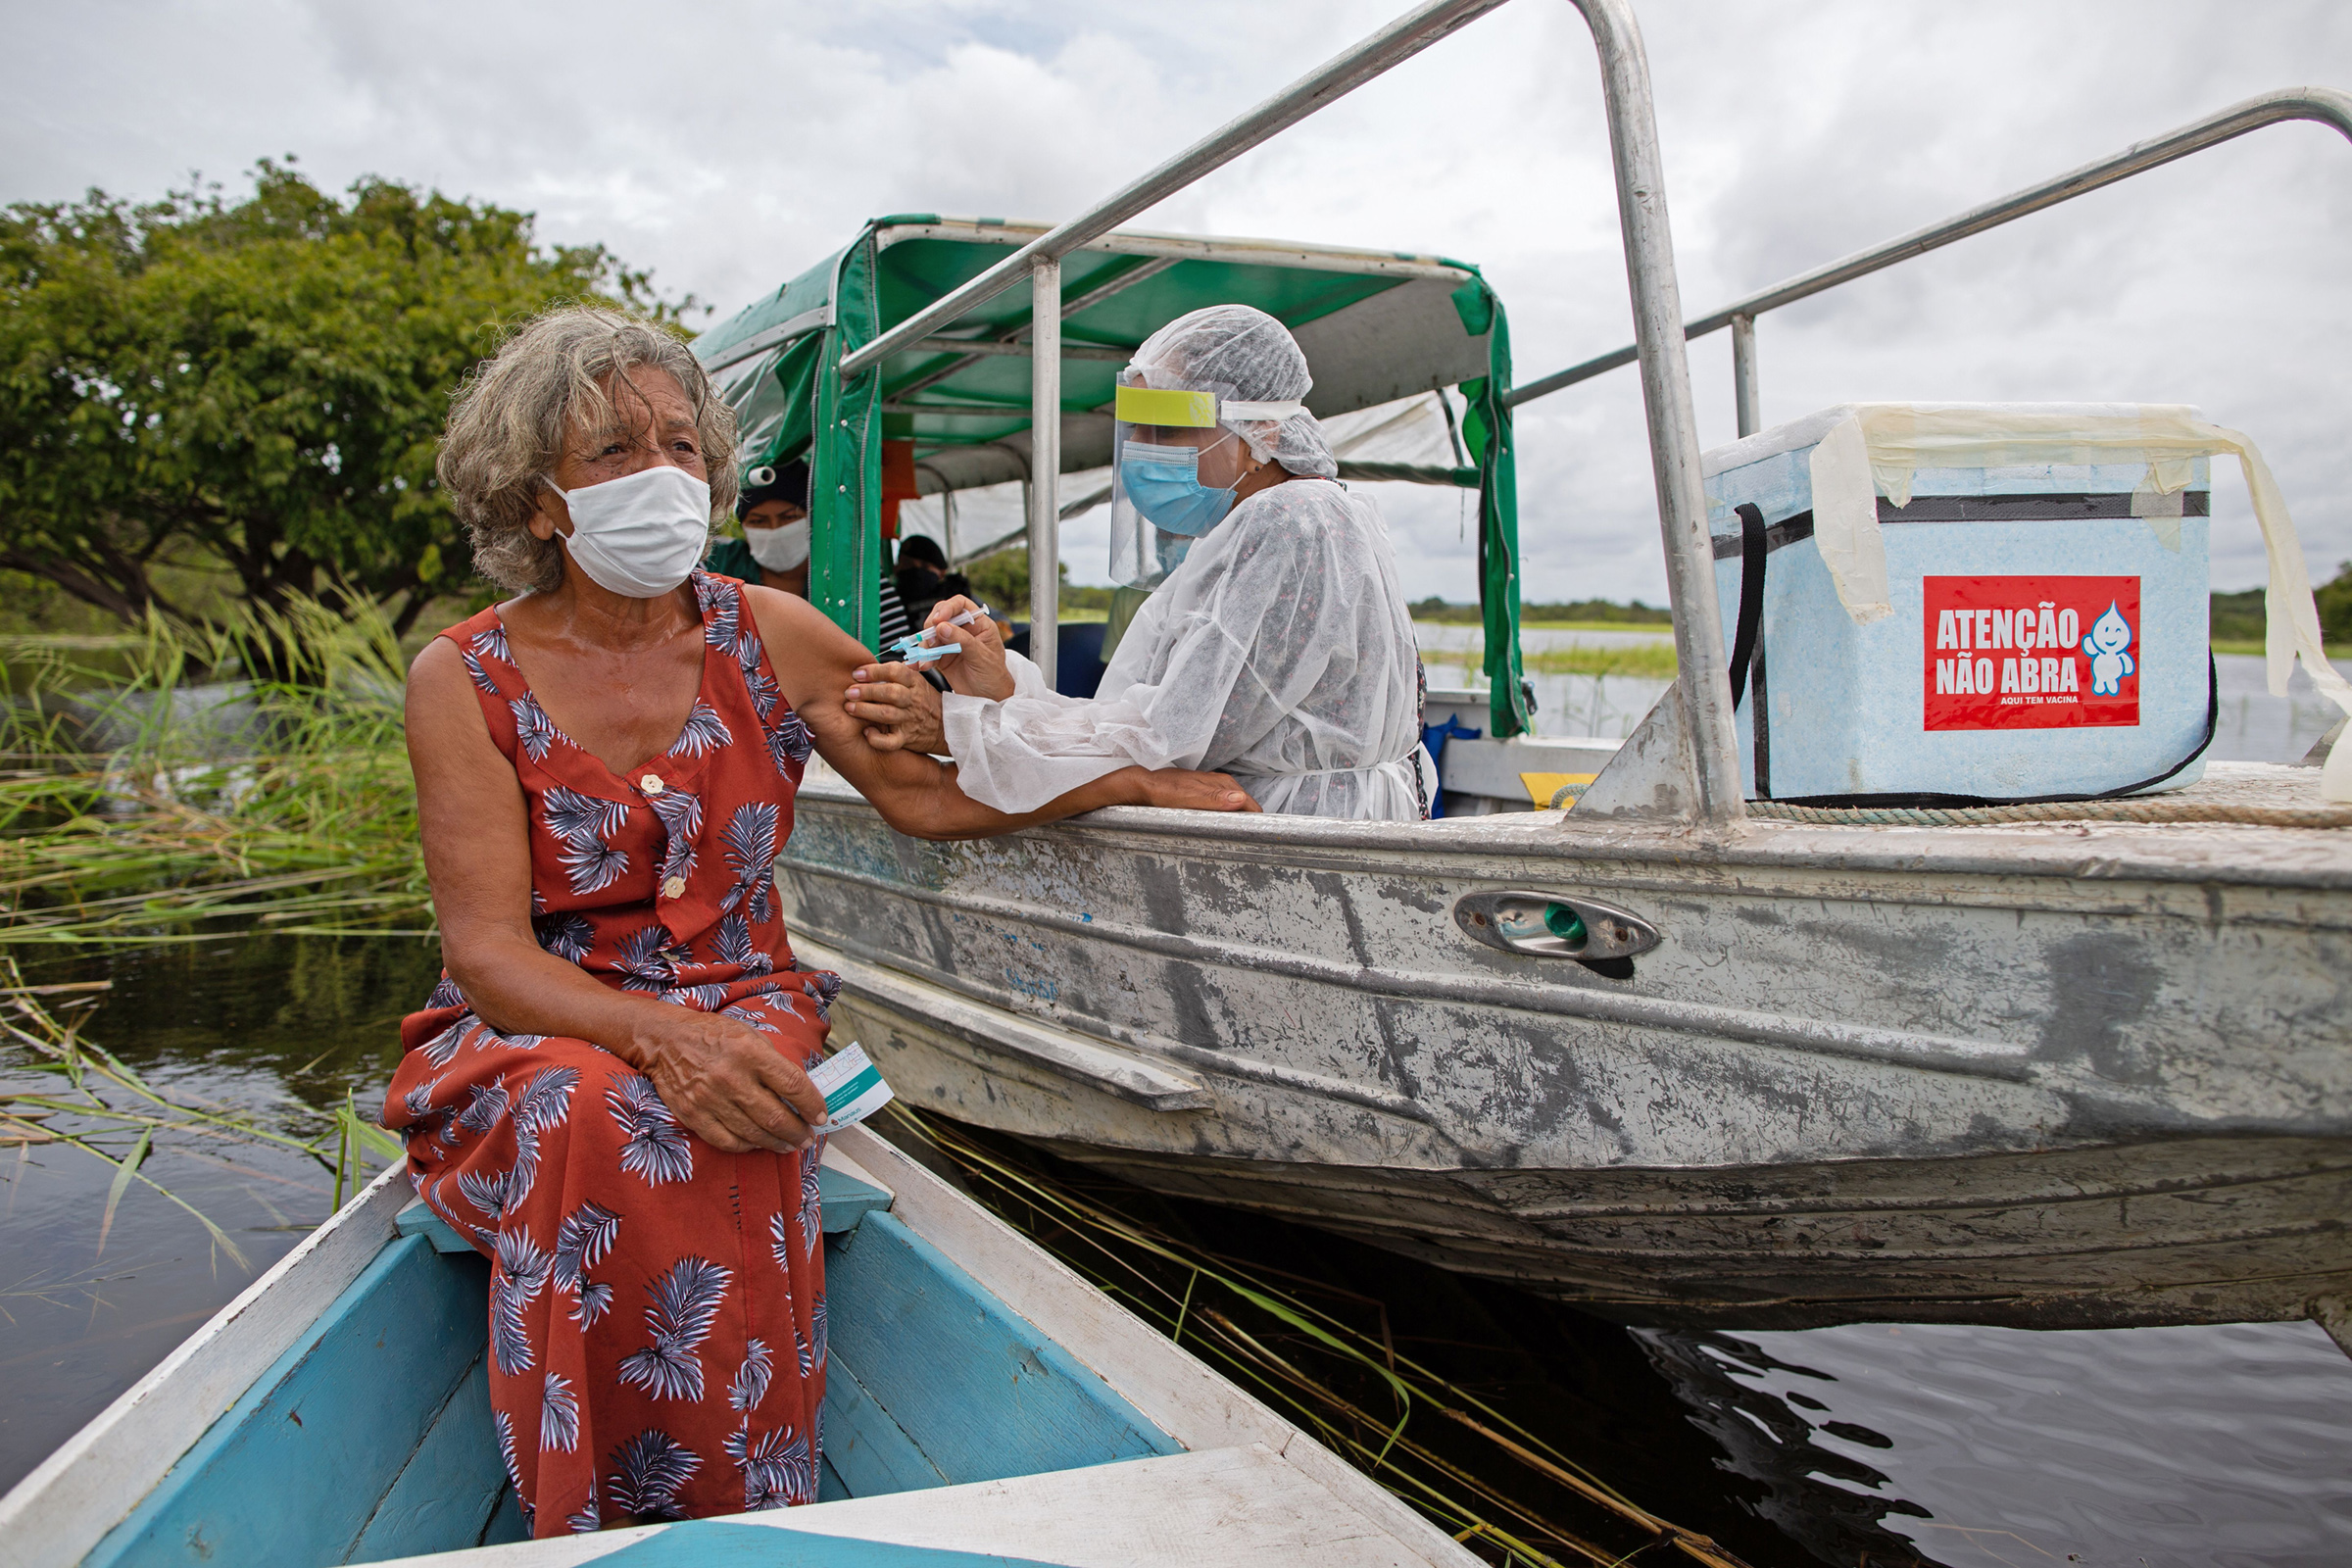 Olga D'arc Pimentel, 72, is vaccinated by a health worker with a dose of the Oxford-AstraZeneca COVID-19 vaccine on the banks of the Rio Negro near Manaus, Brazil, on Feb. 9, 2021. (Michael Dantas—AFP/Getty Images)